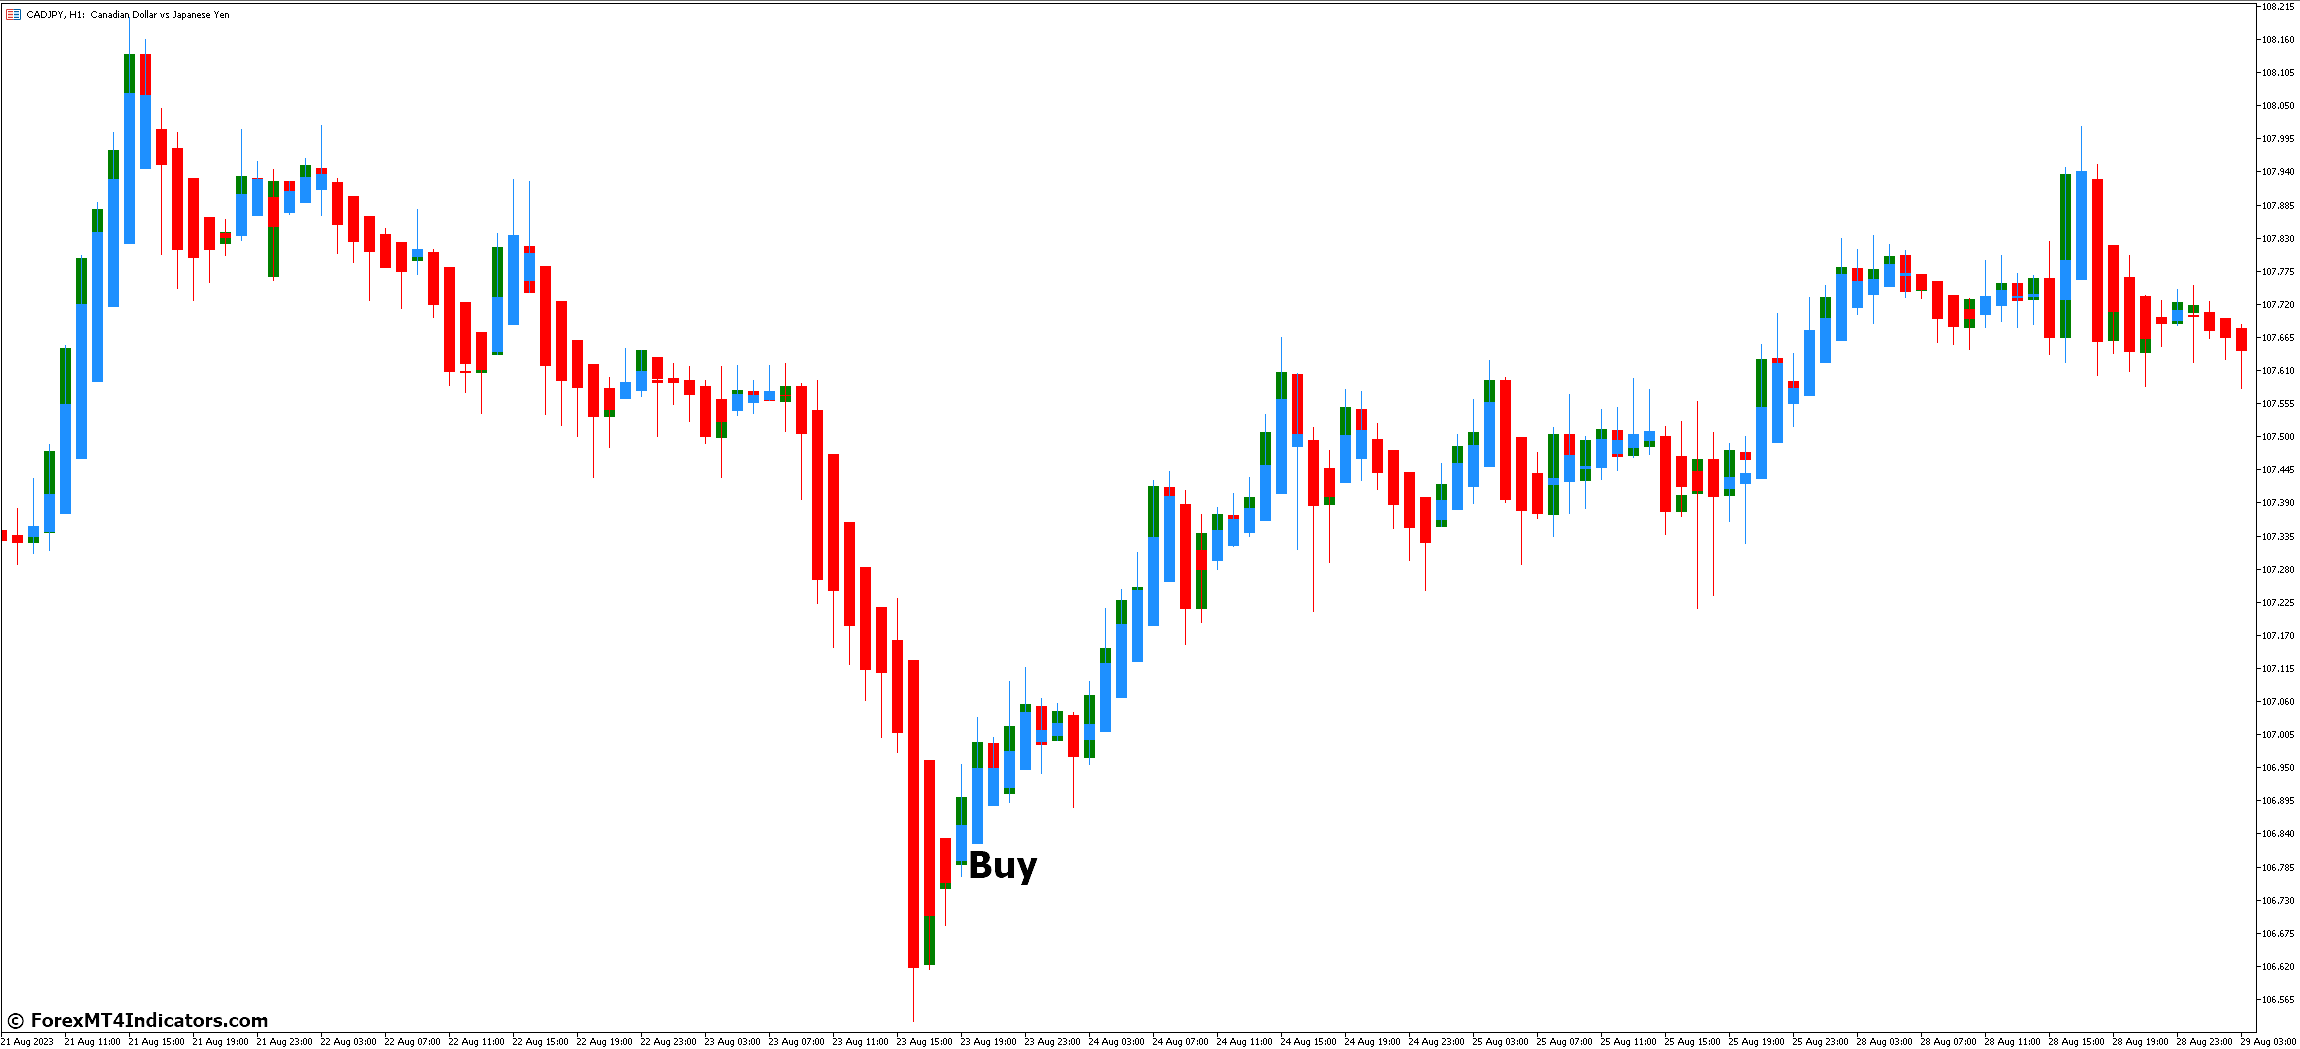 How to Trade with Heiken Ashi MT5 Indicator - Buy Entry